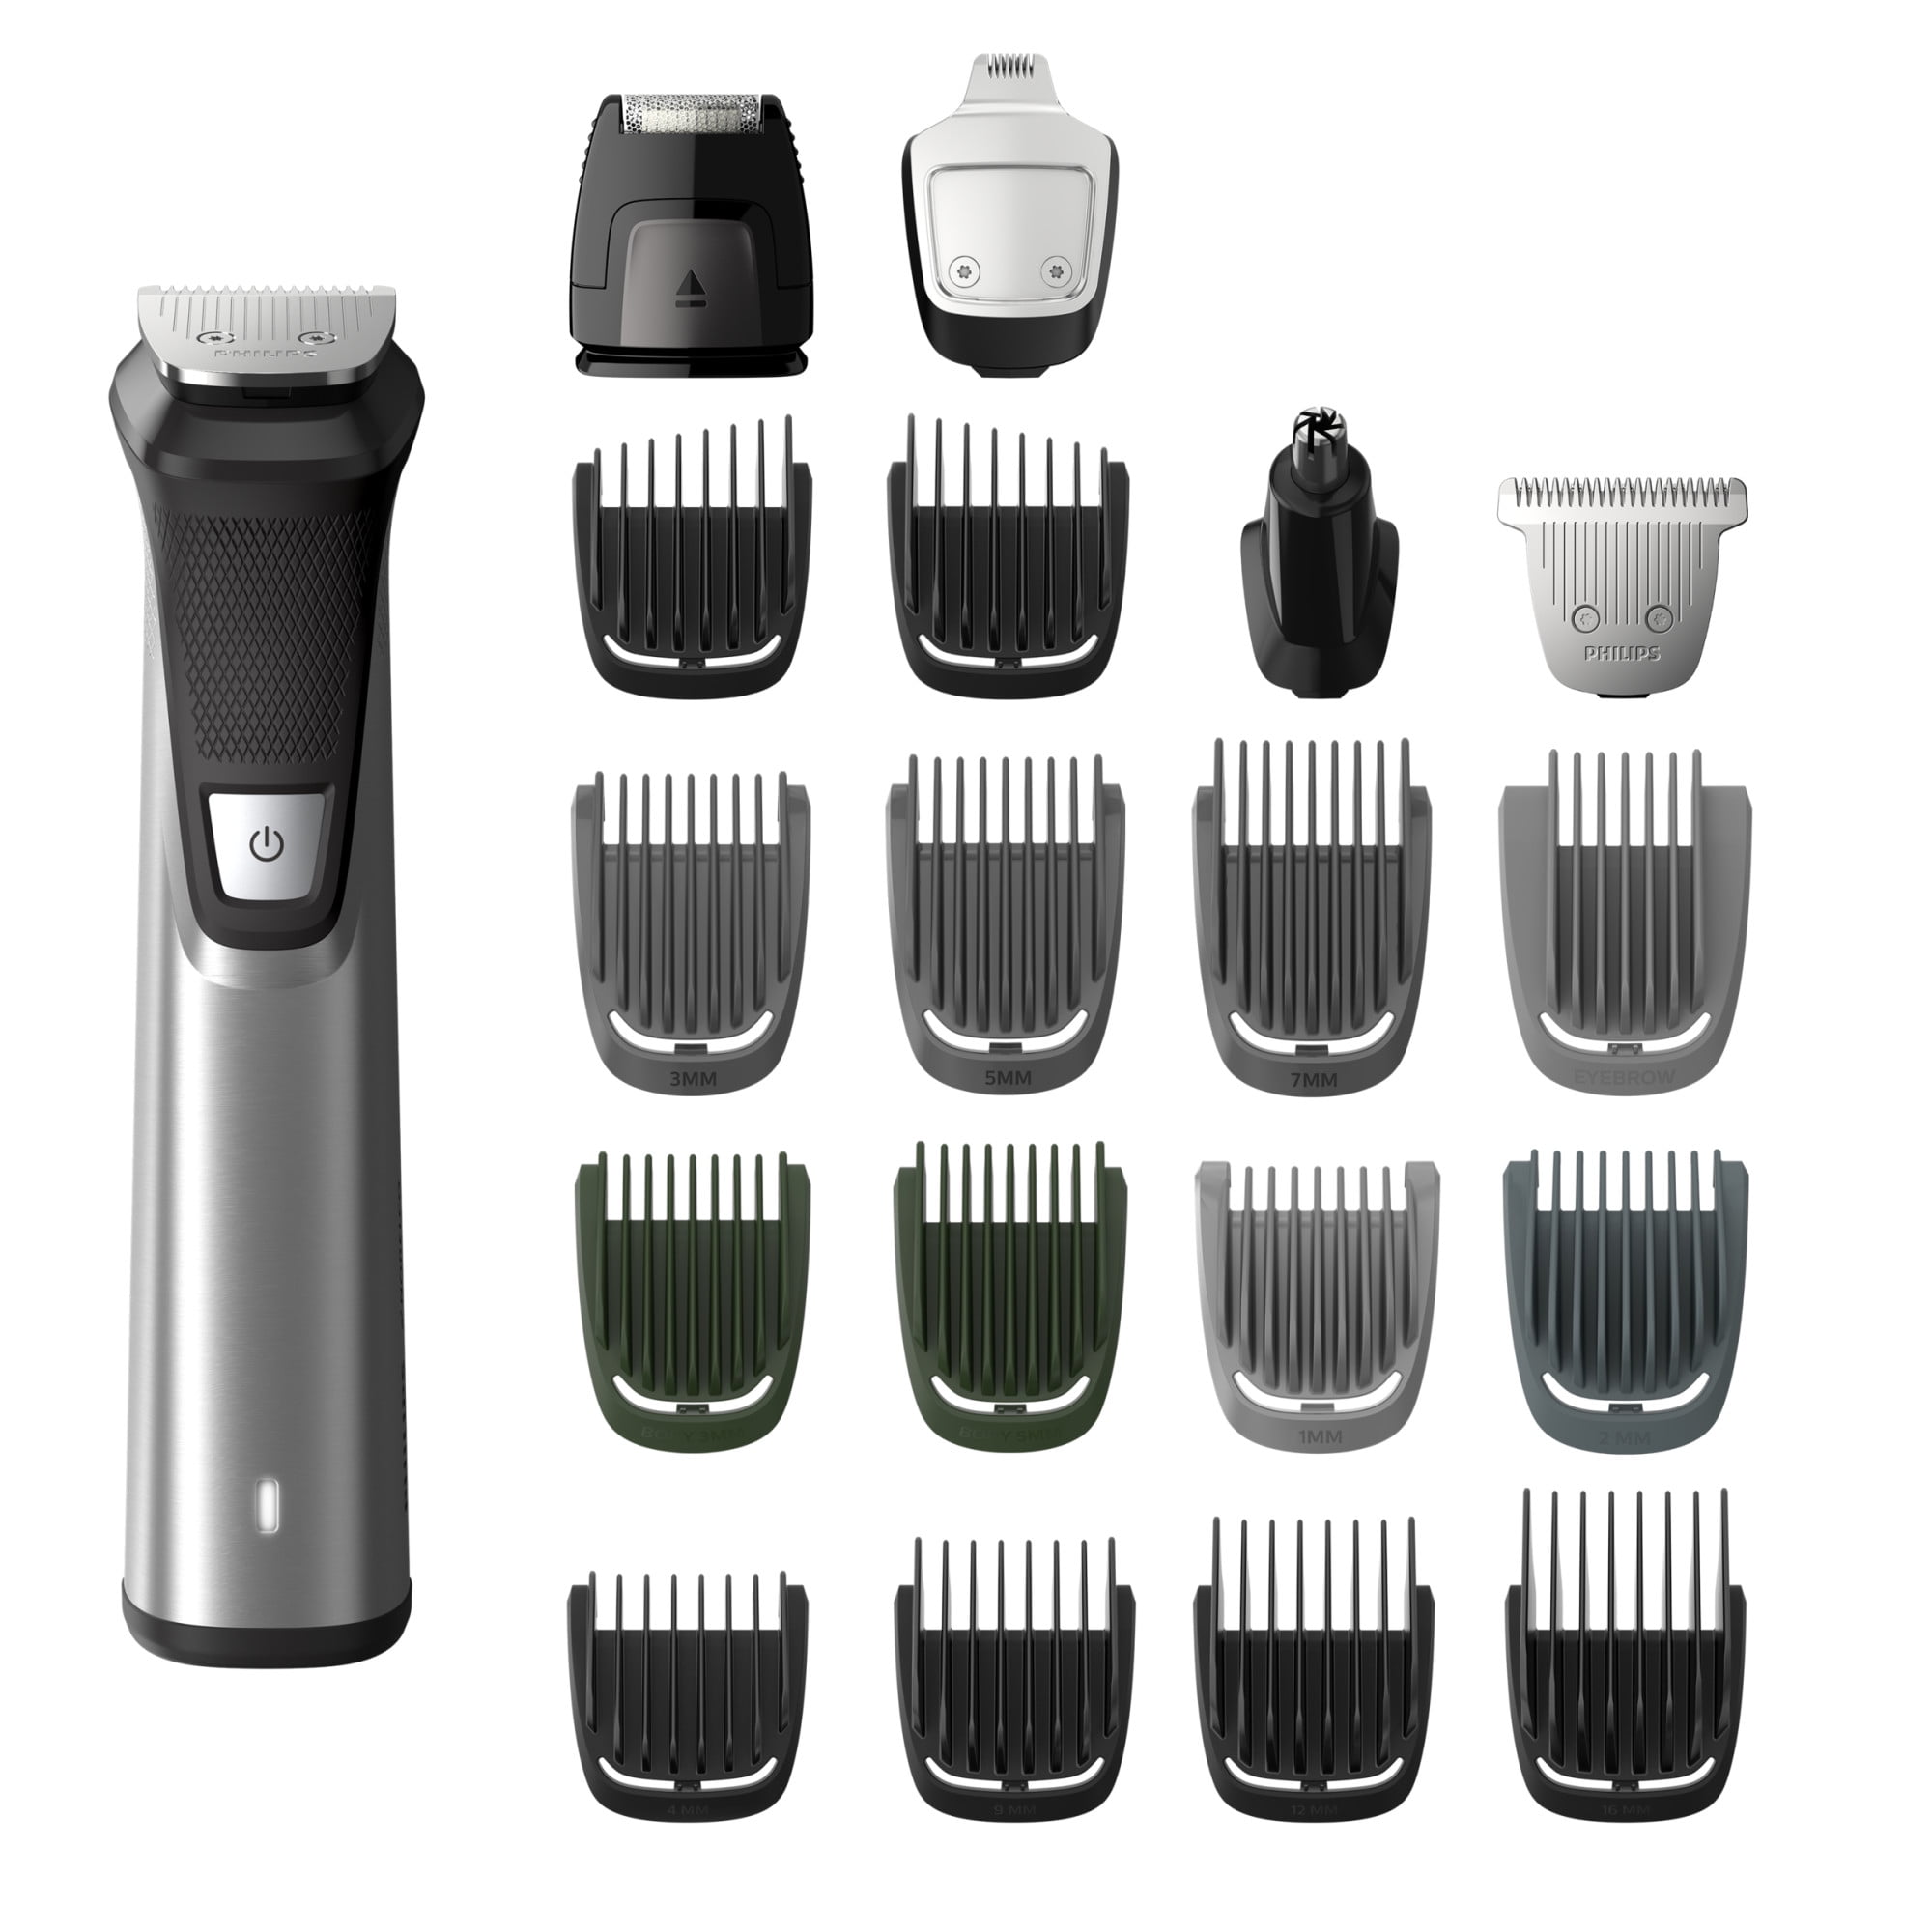 Philips Norelco Multigroom Series 7000 23 Piece Mens Grooming Kit, Trimmer For Beard, Head, Body, and Face - No Blade Oil Needed, MG7750/49